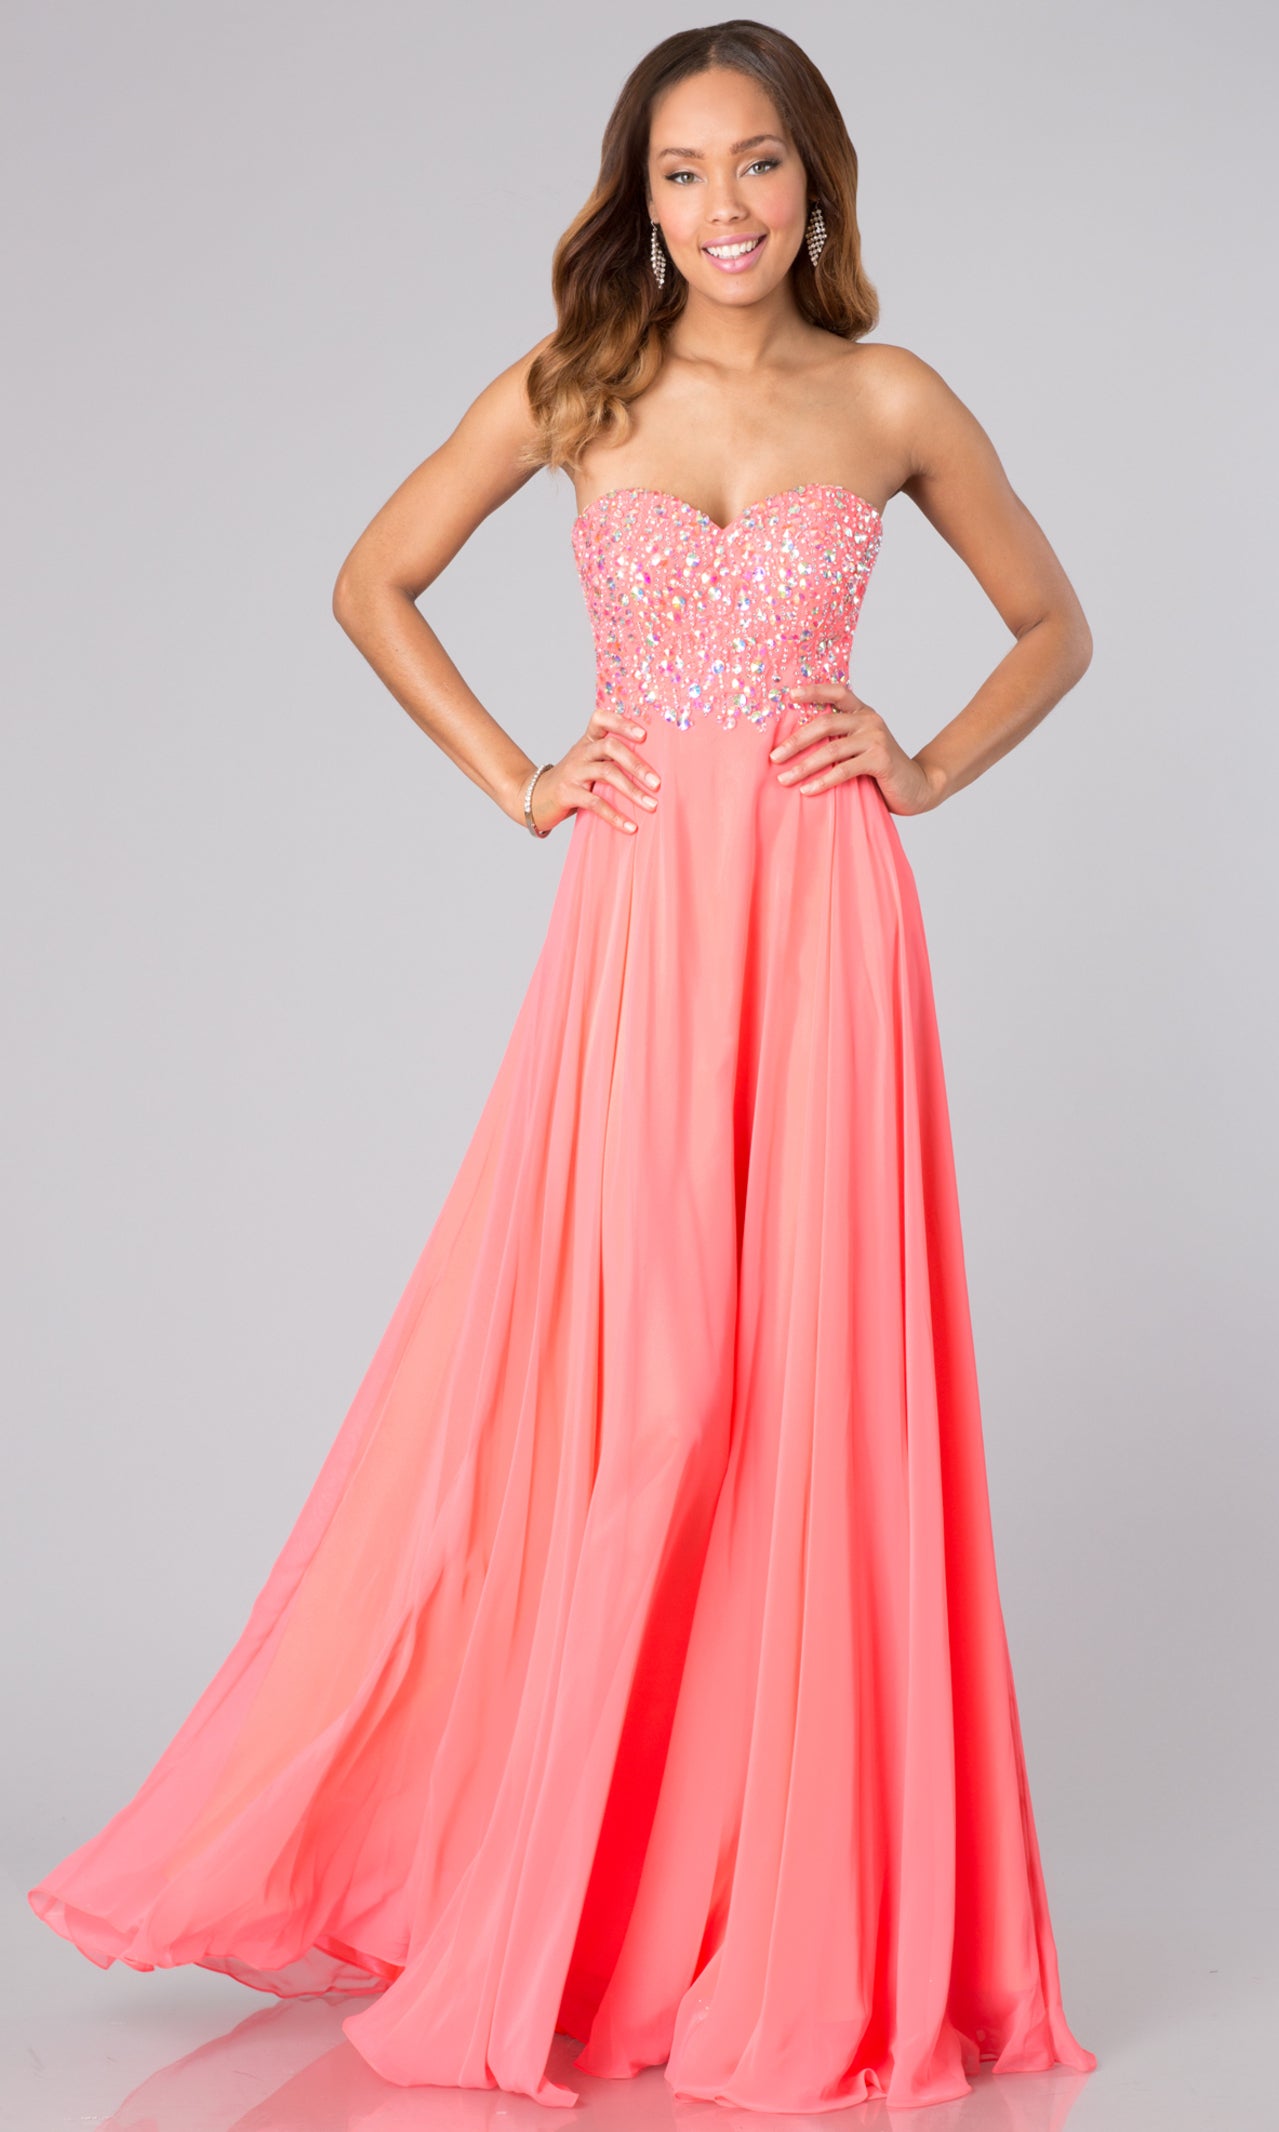 Electric Pink Full Length Strapless Sweetheart Dress